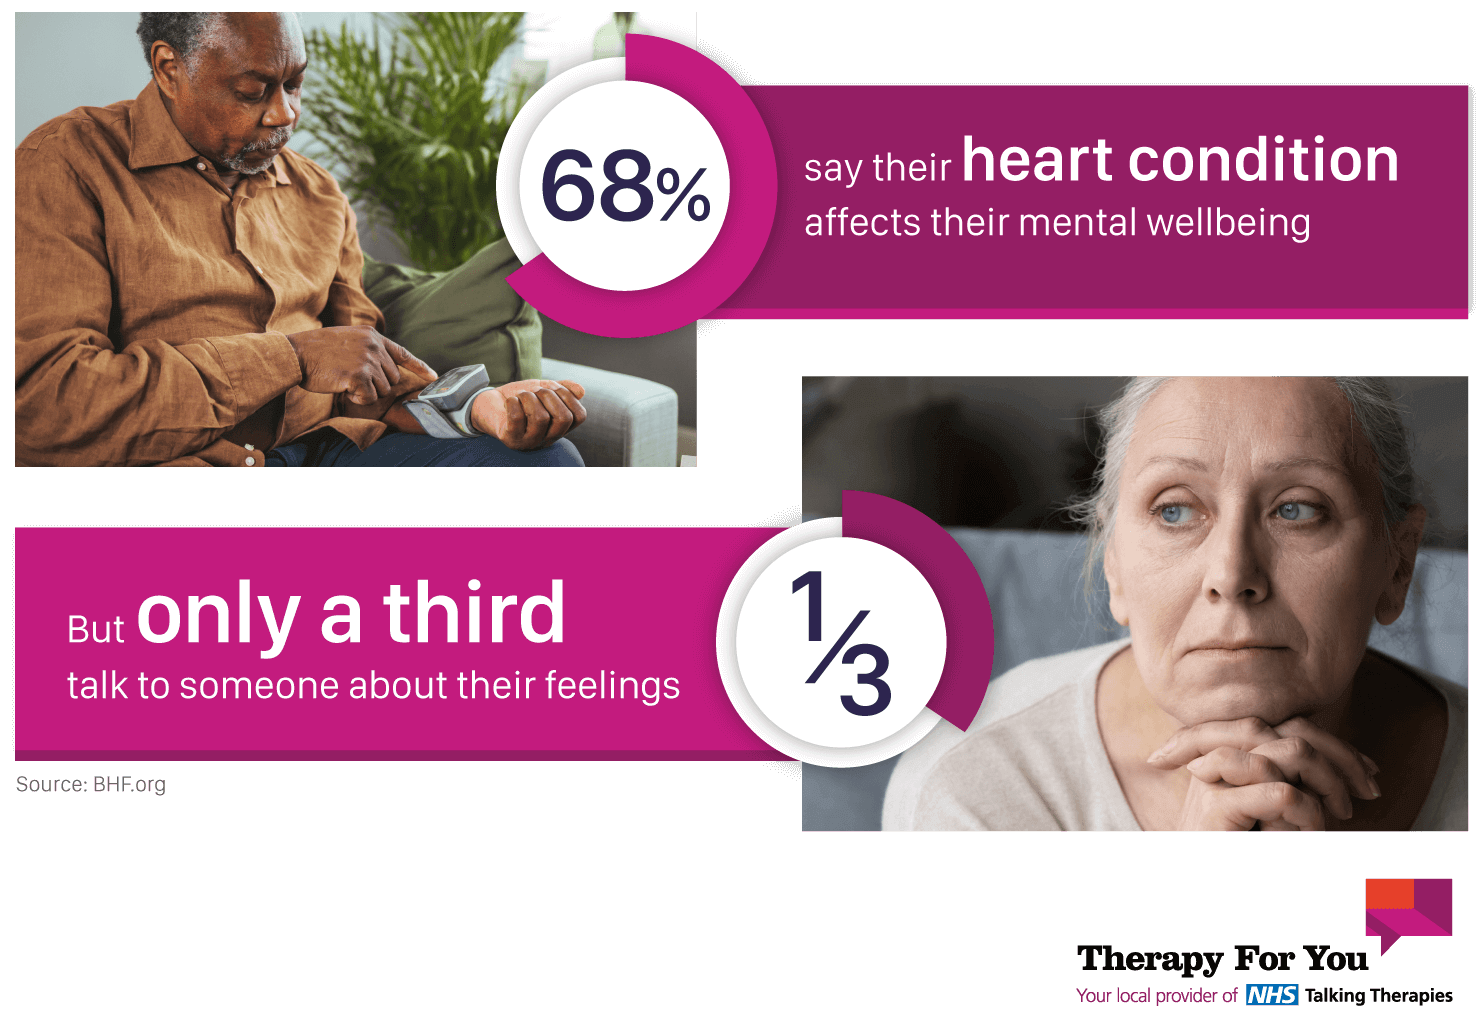 Image showing how 68% of people with heart condition say it affects mental wellbeing and only a third talk about it with someone - infographic